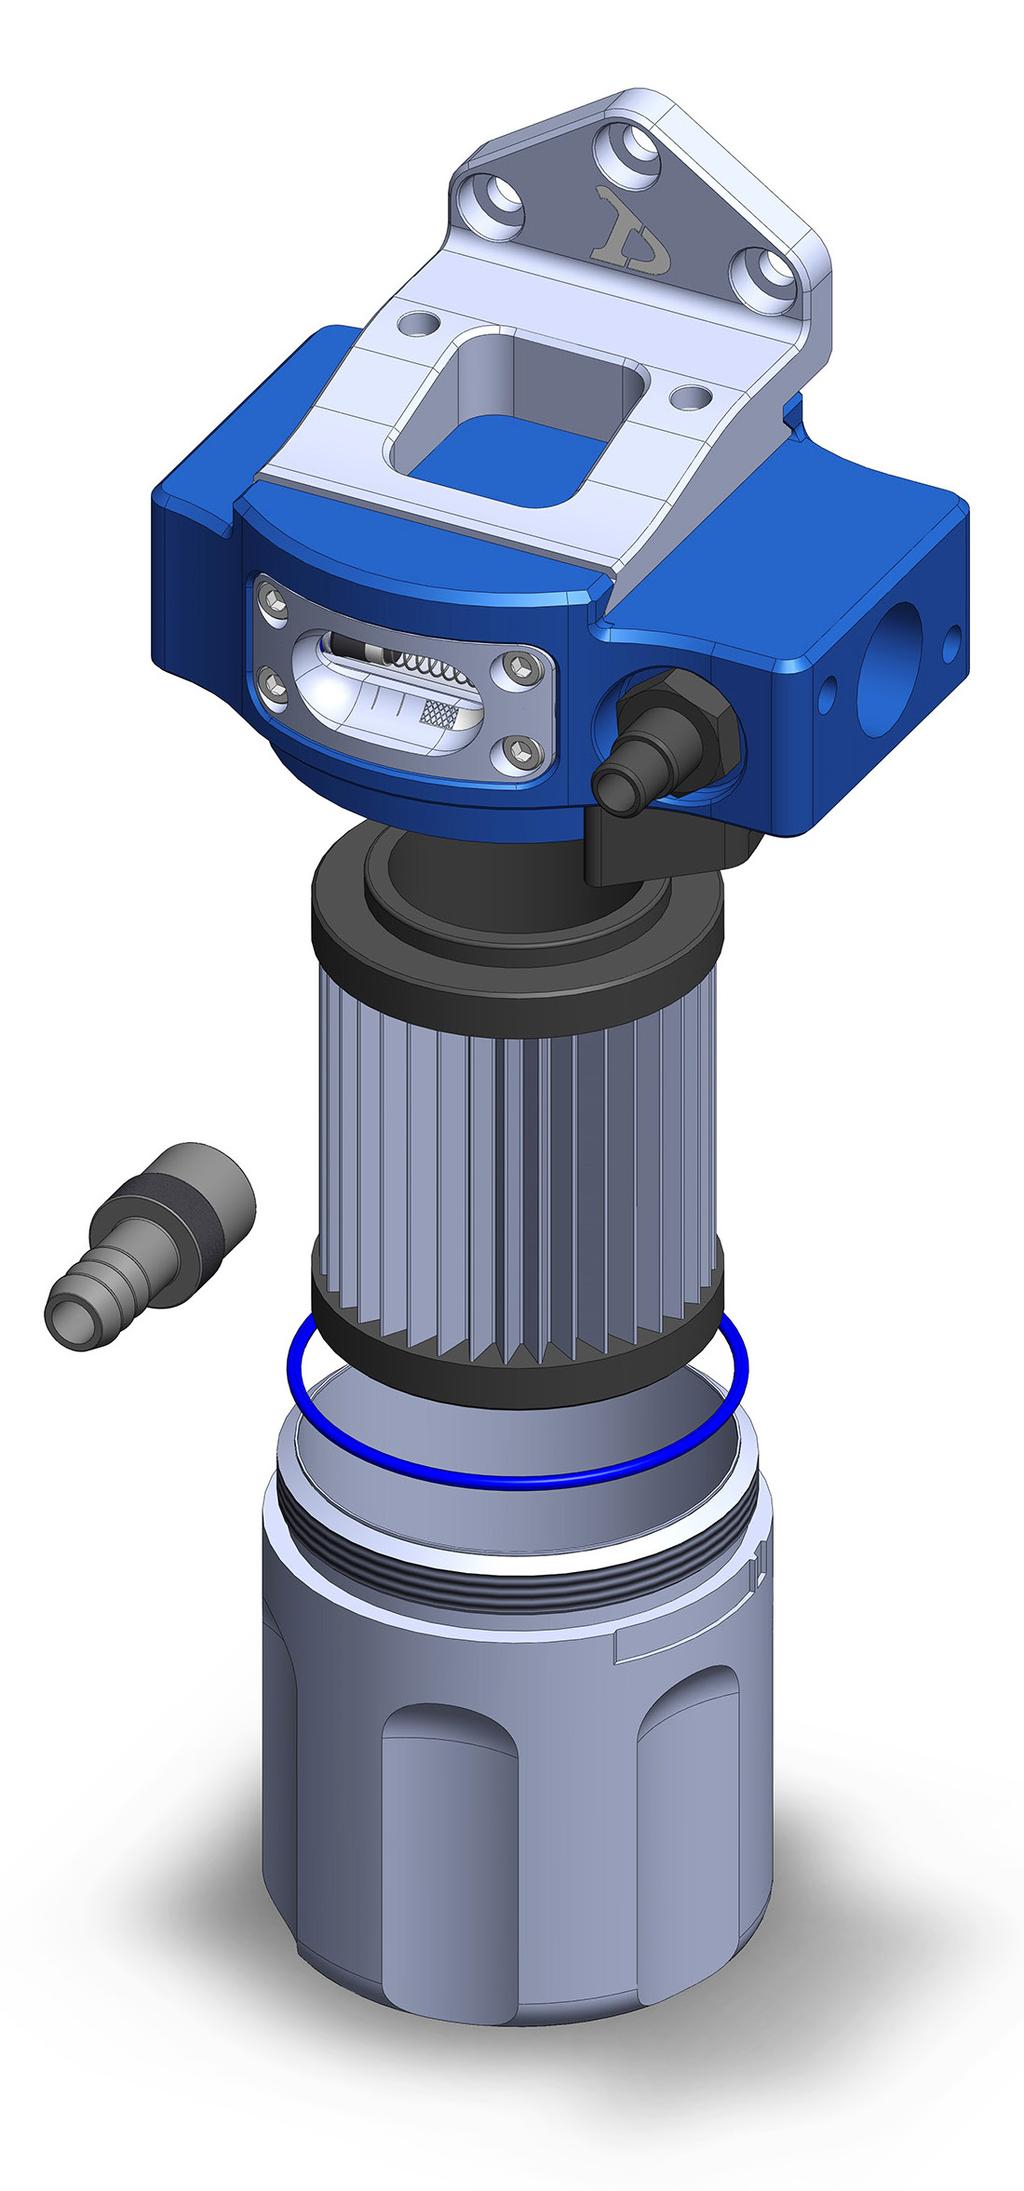 Servicing Relieving Pressure The ID F750 has been designed to make element changes quick and simple. The first step is to release pressure from the system, which is done with the Schrader adapter.